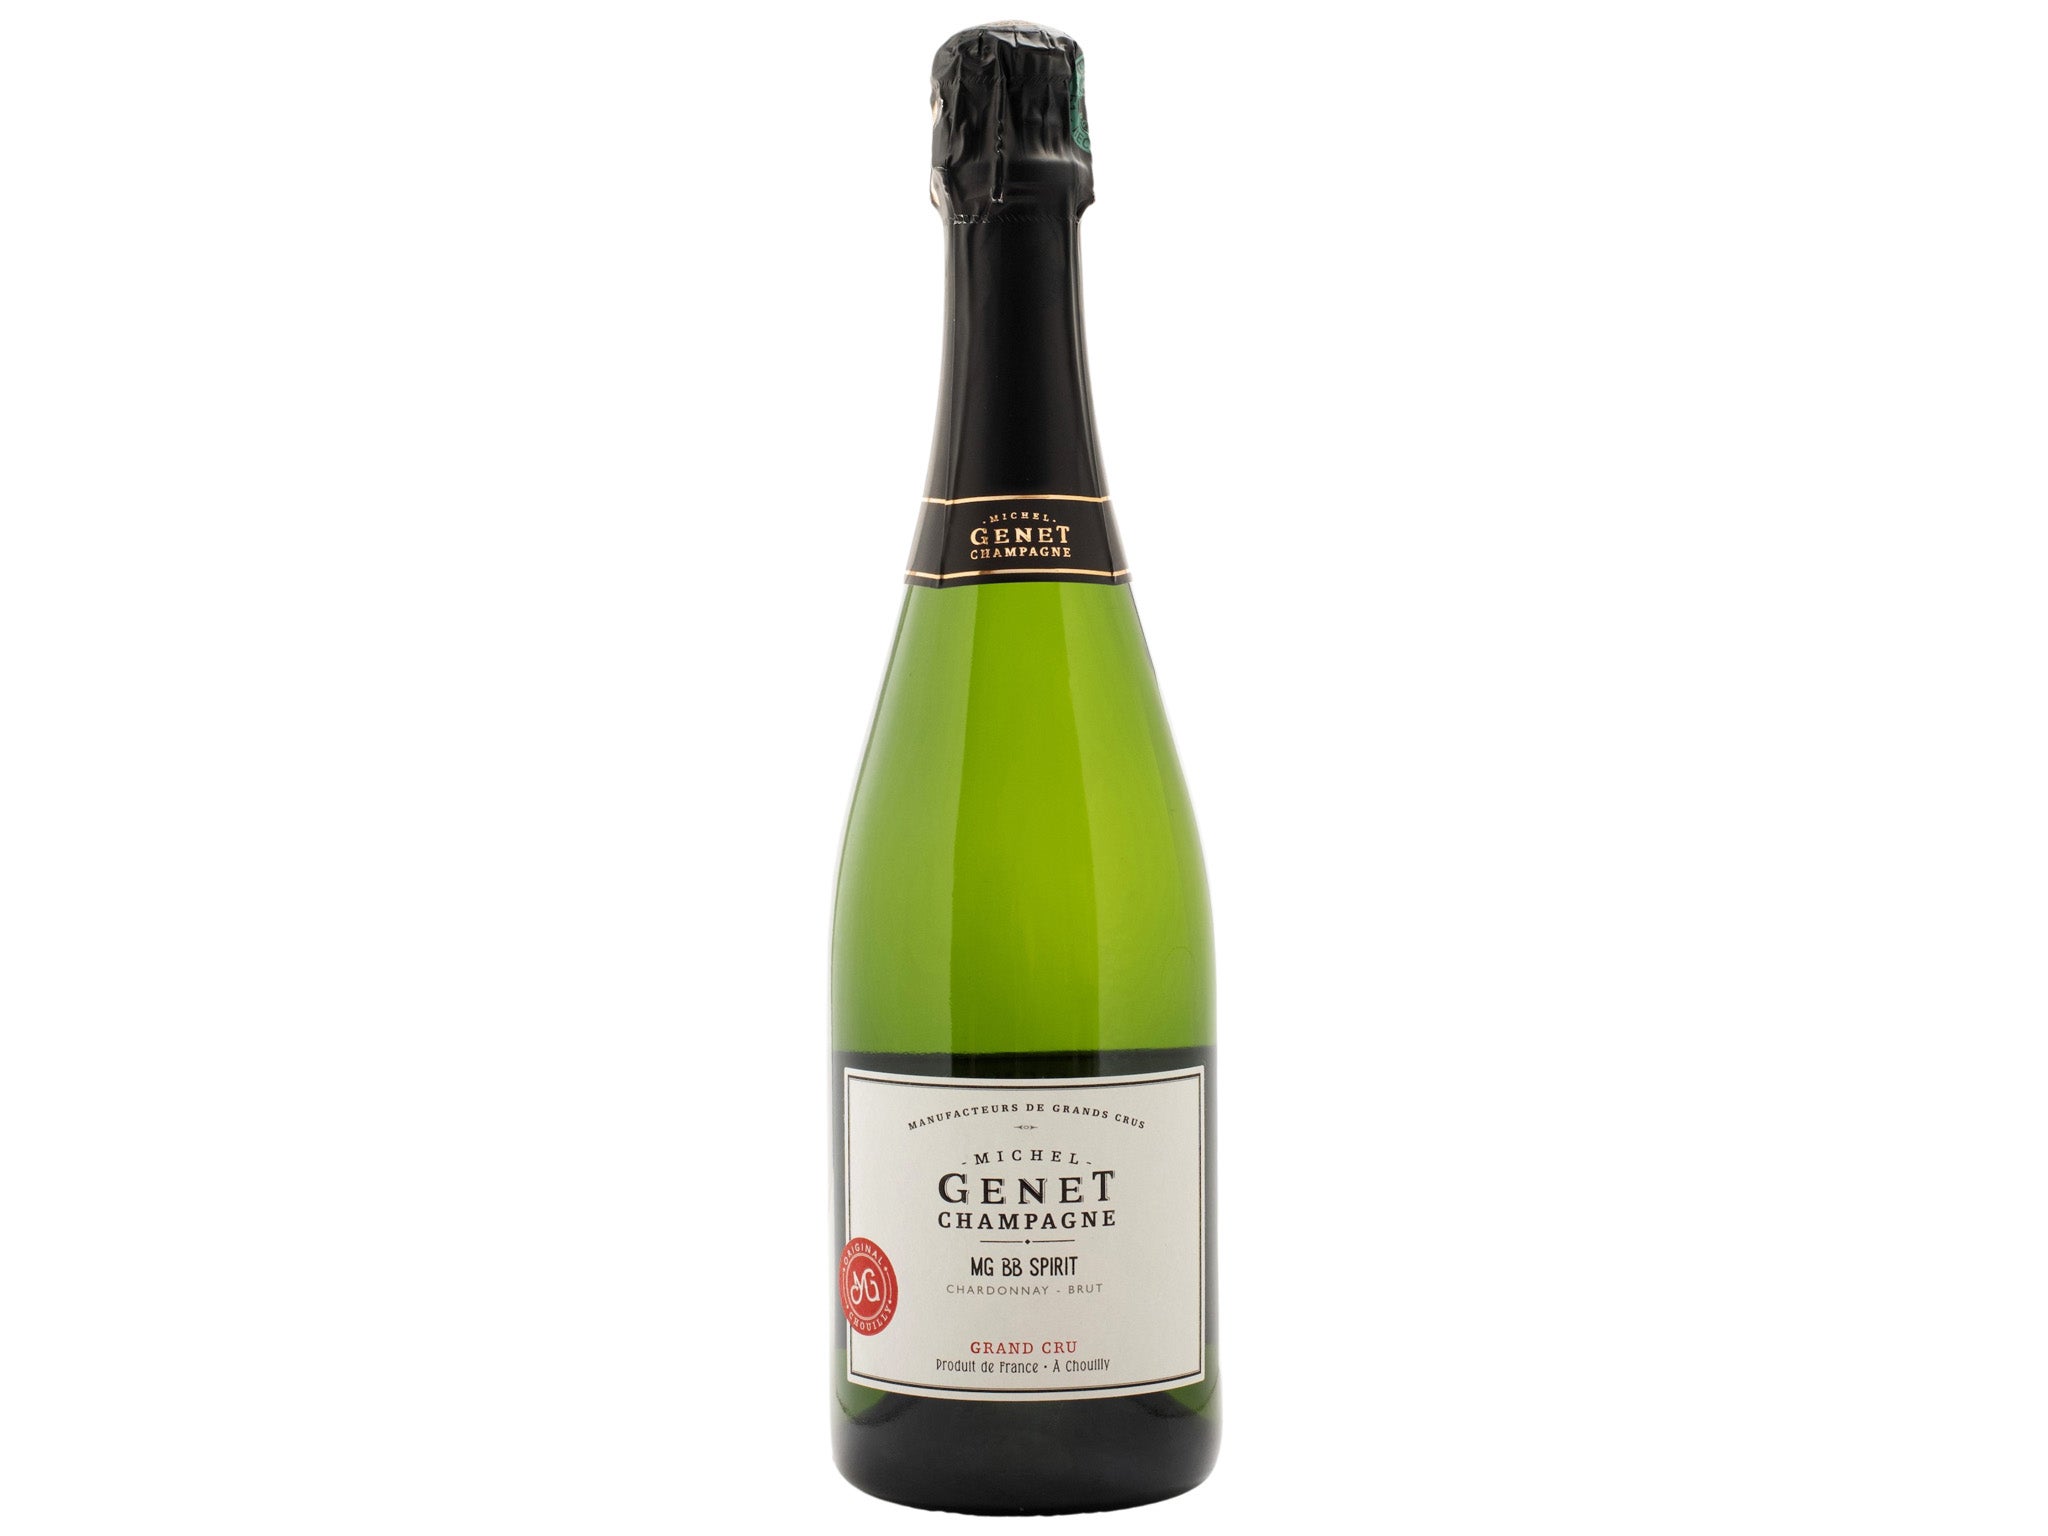 This Blanc de Blancs from Chouilly is surprisingly edgy